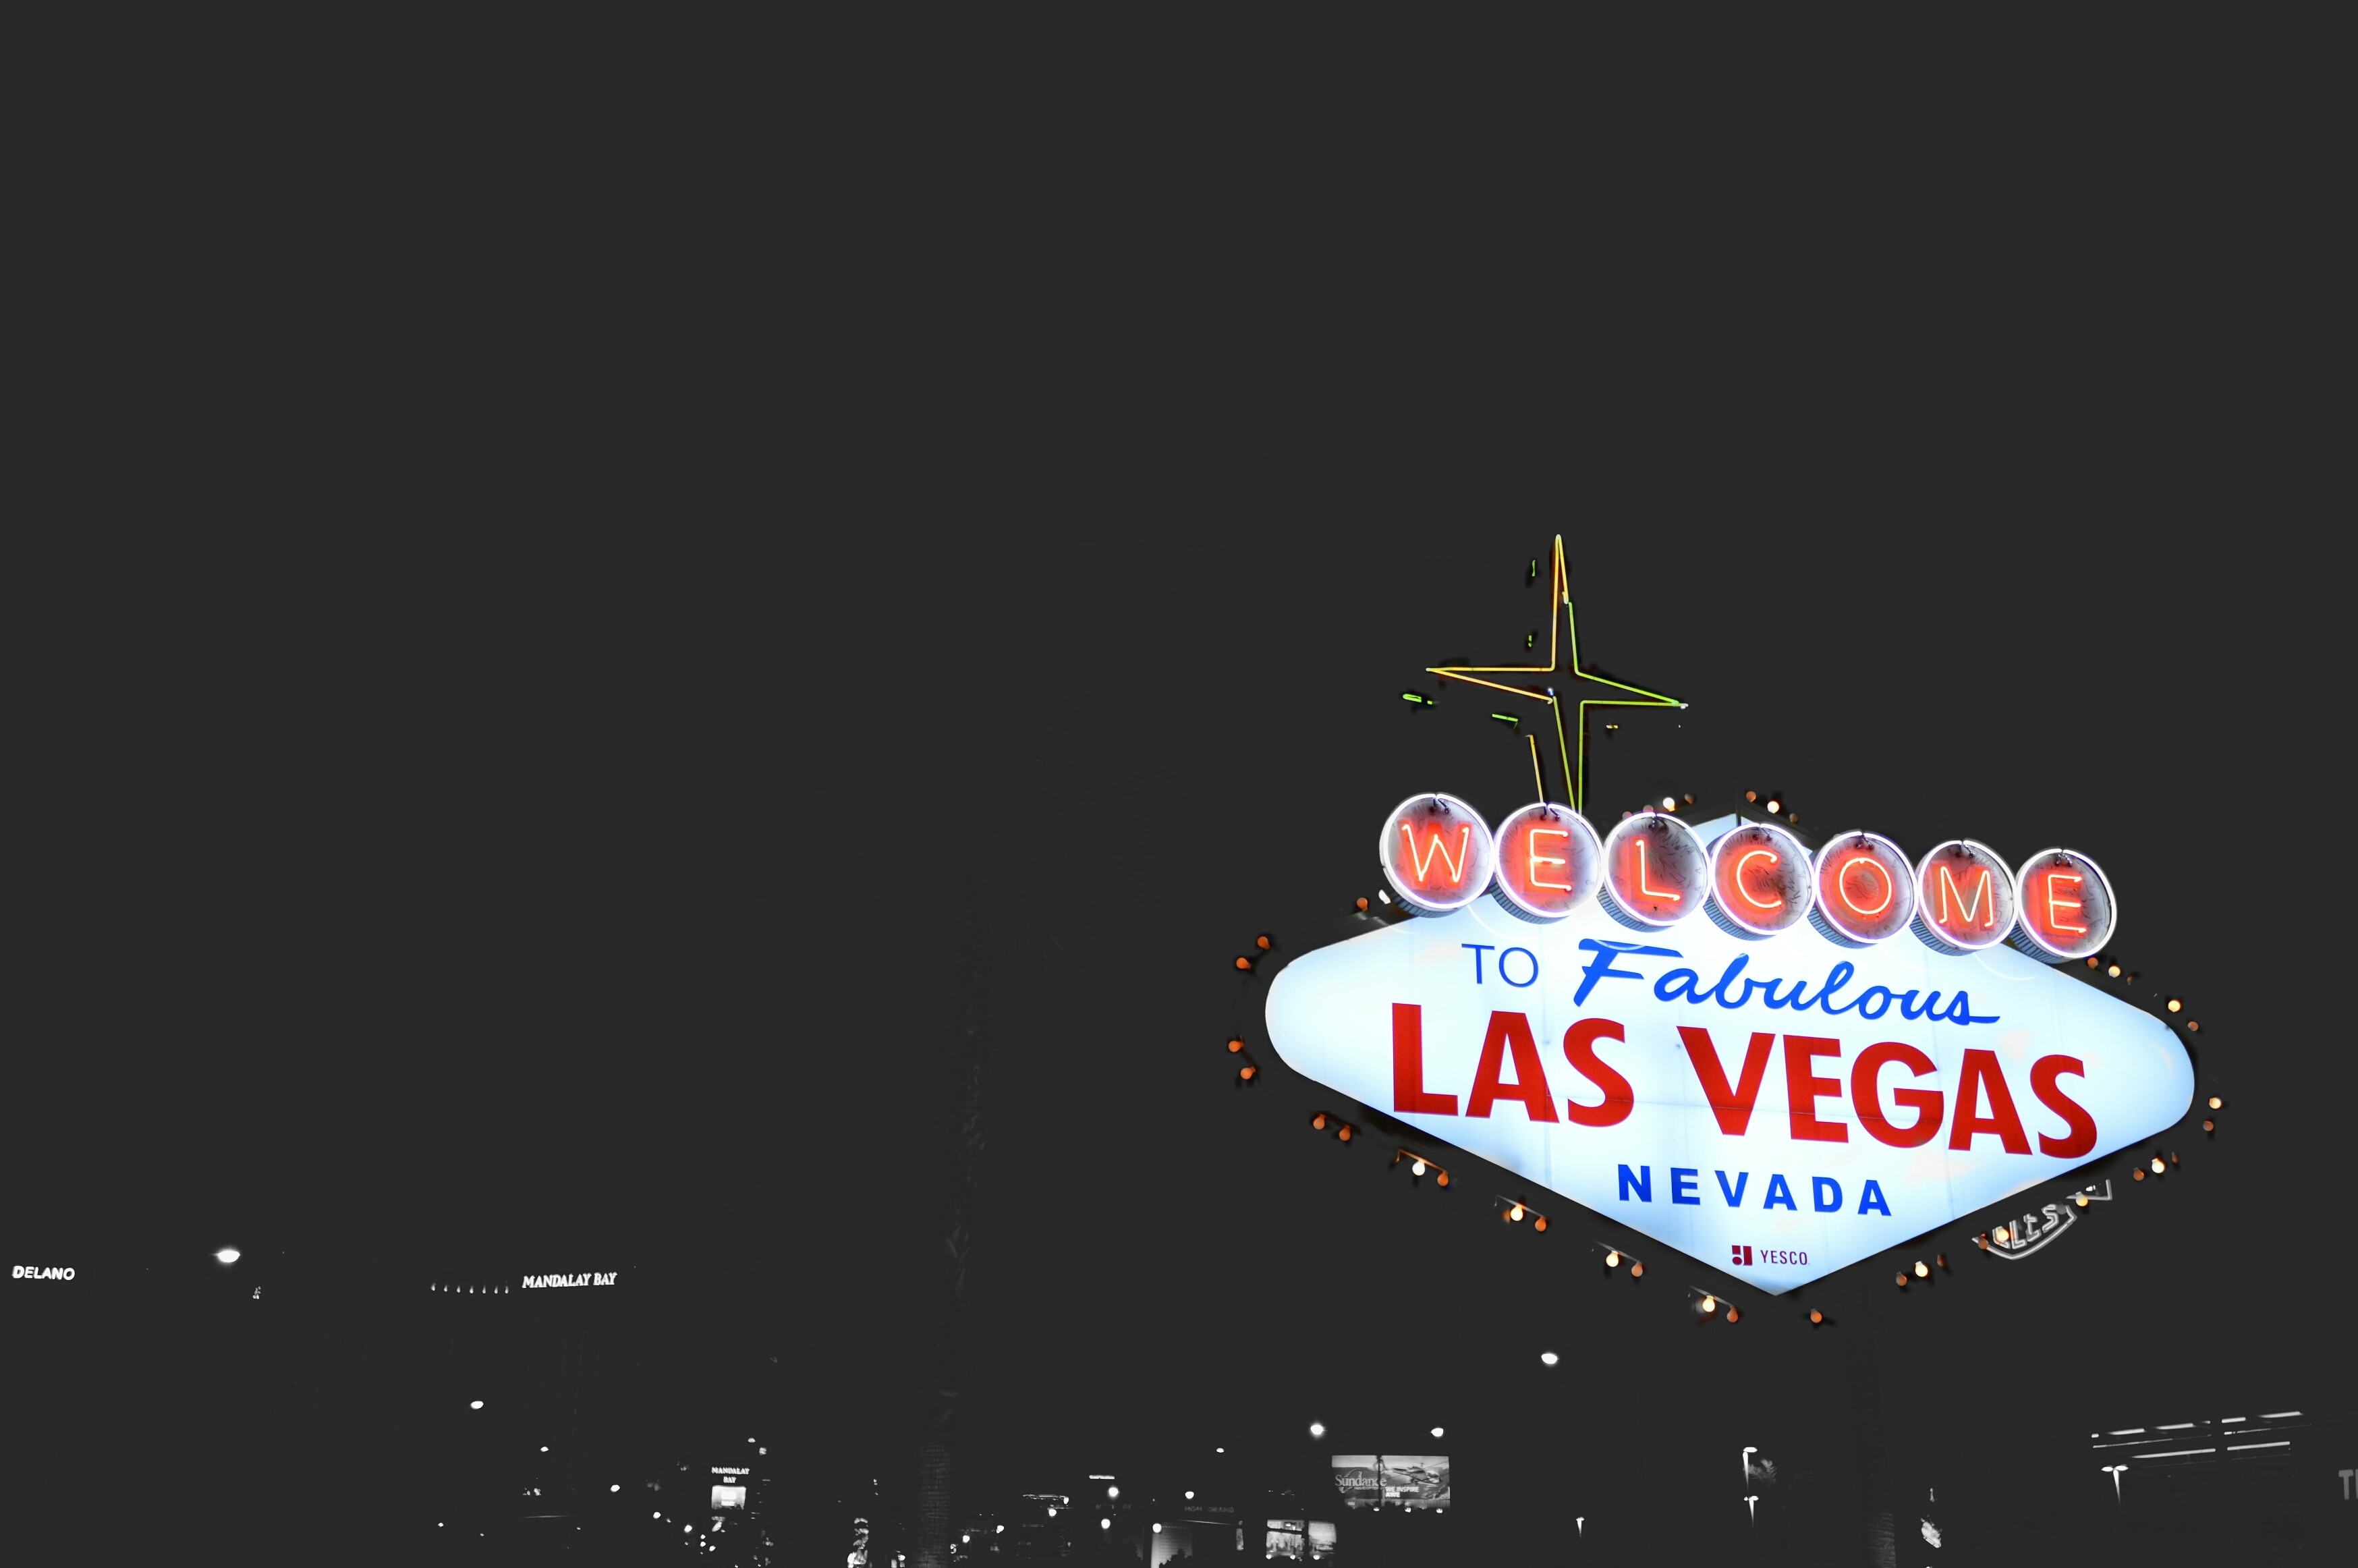 outdoor view of welcome to fabulous las vegas nevada poster during nigh time